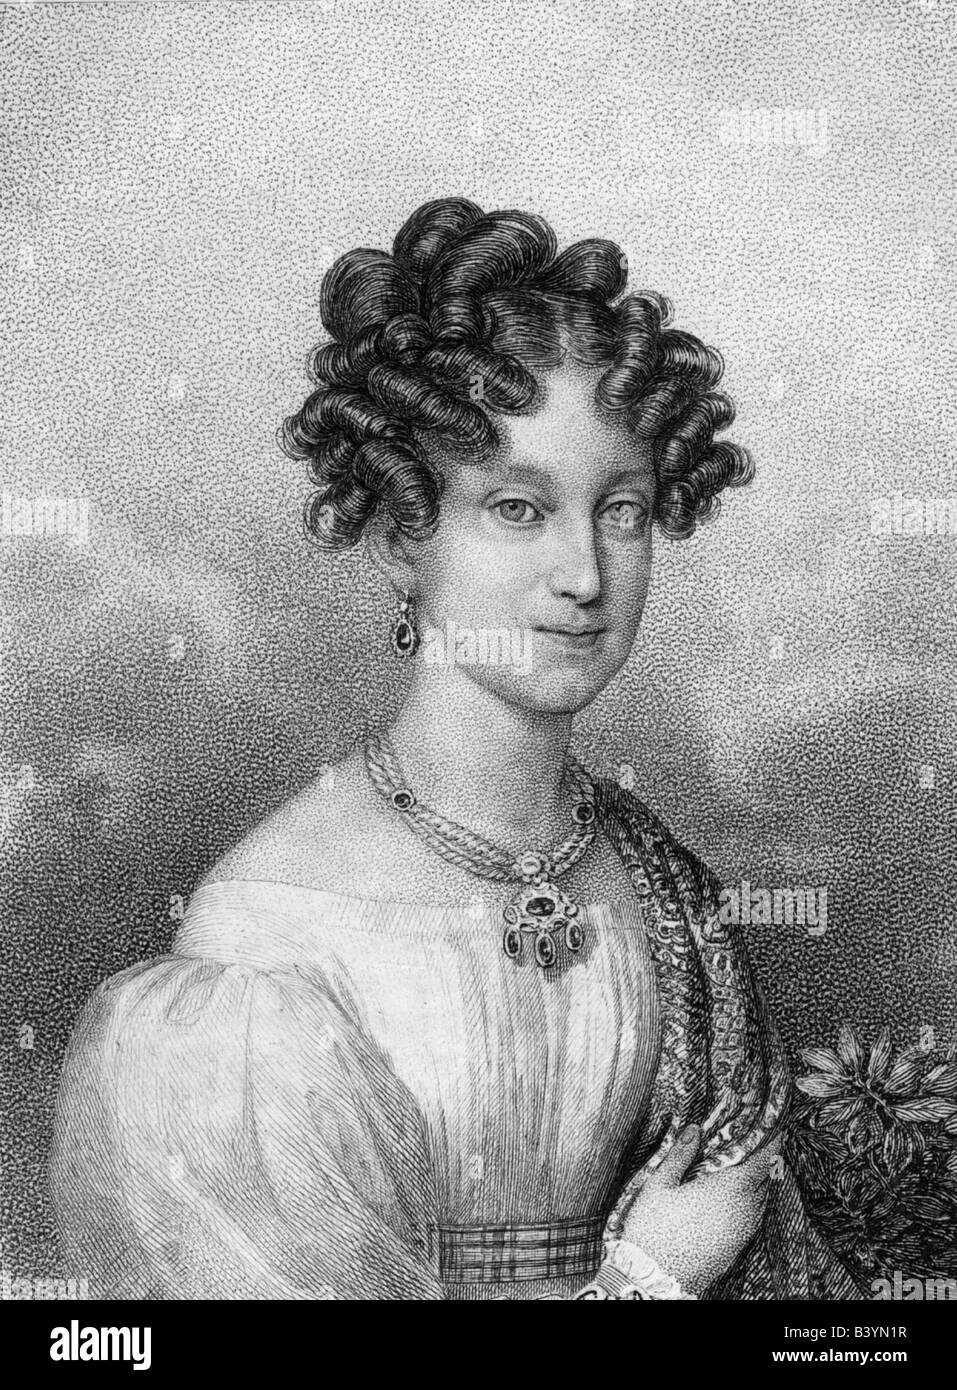 Marie Louise, 12.12.1791 - 12.12.1847, Empress Consort of France 2.4.1810 - 6.4.1814, half length, steel engraving, 19th century, , Artist's Copyright has not to be cleared Stock Photo